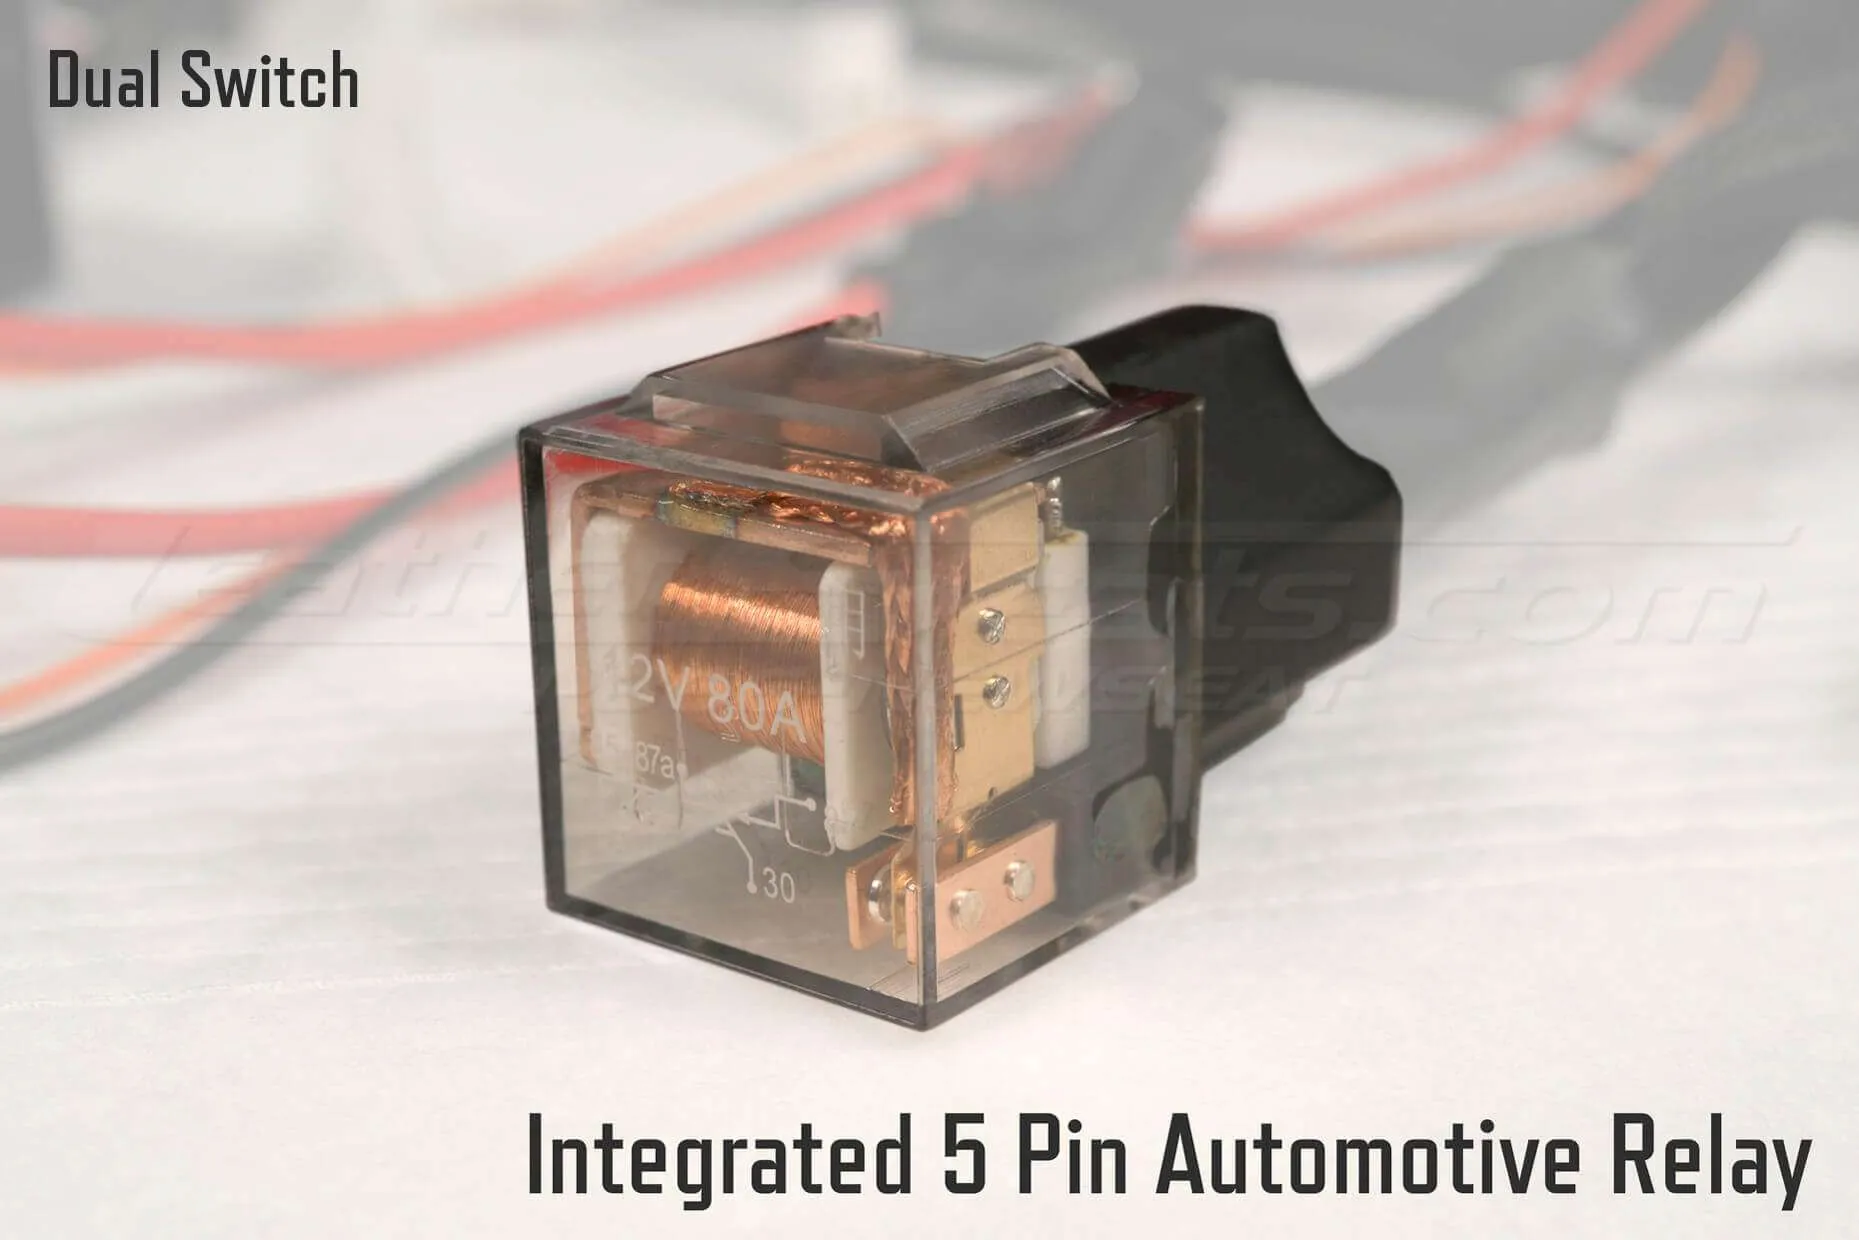 Dual Switch Automotive Seat Heaters Integrated 5 Pin Automotive Relay